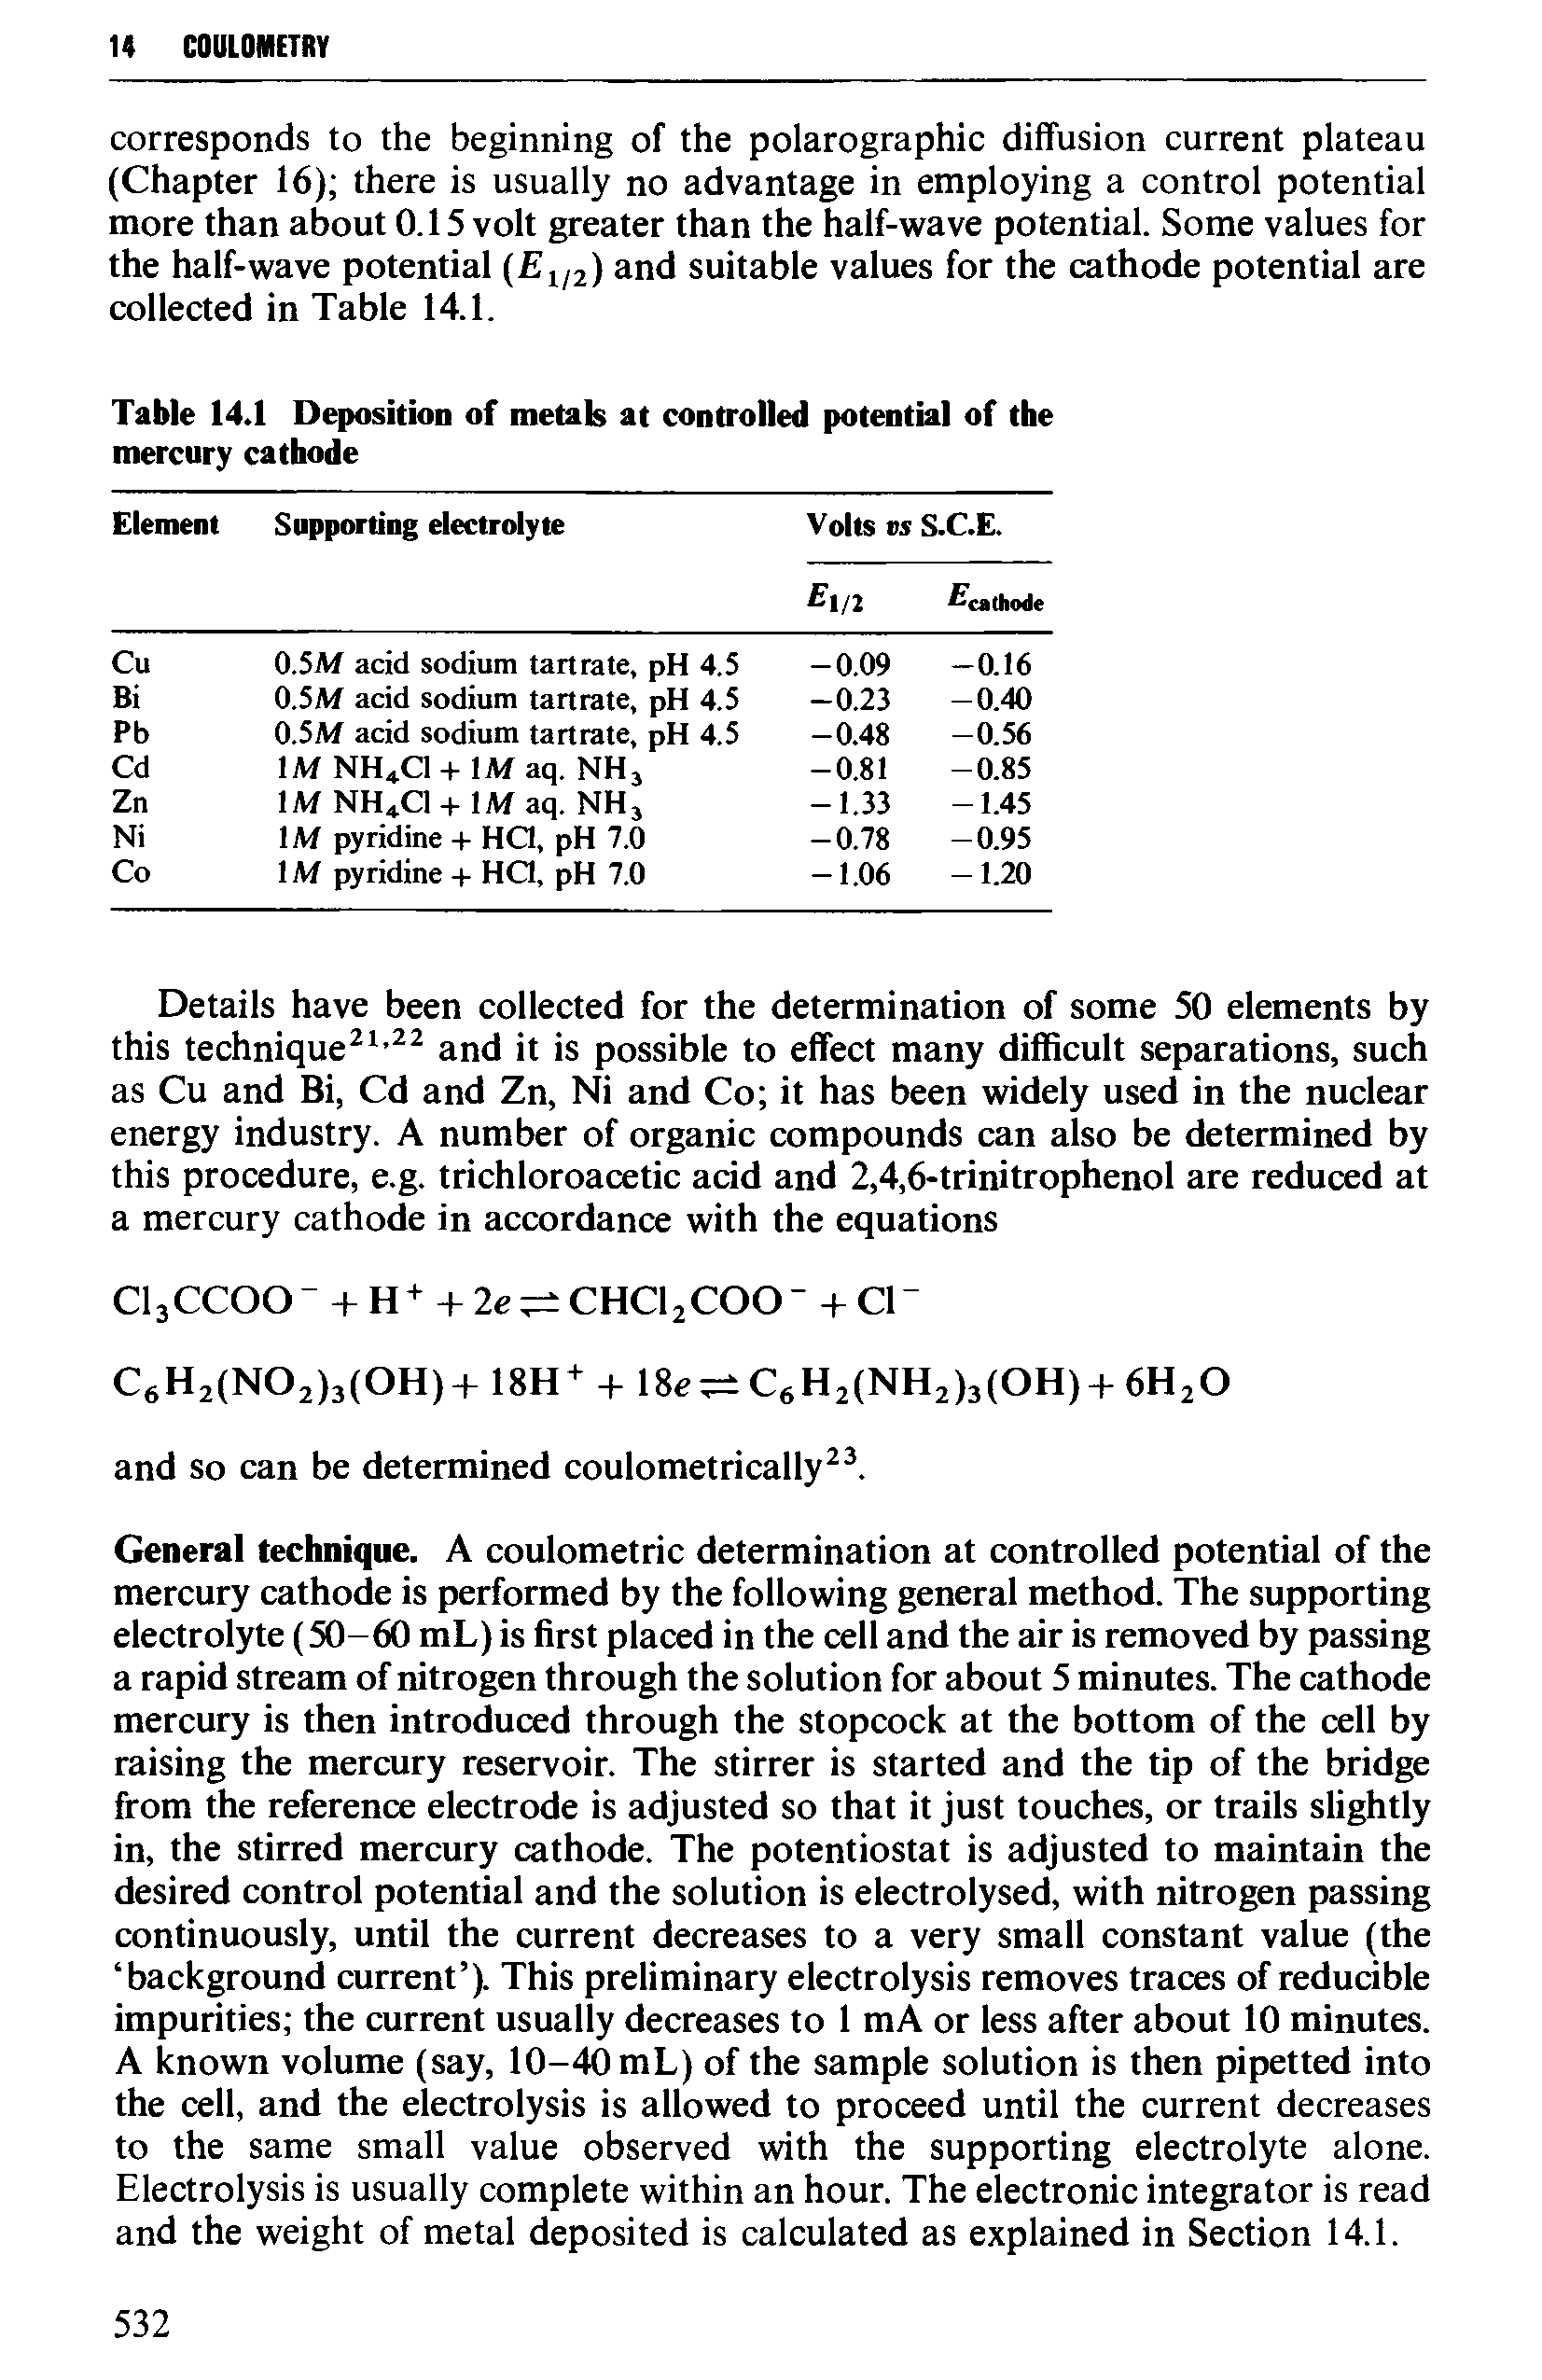 Table 14.1 Deposition of metals at controlled potential of the mercury cathode...